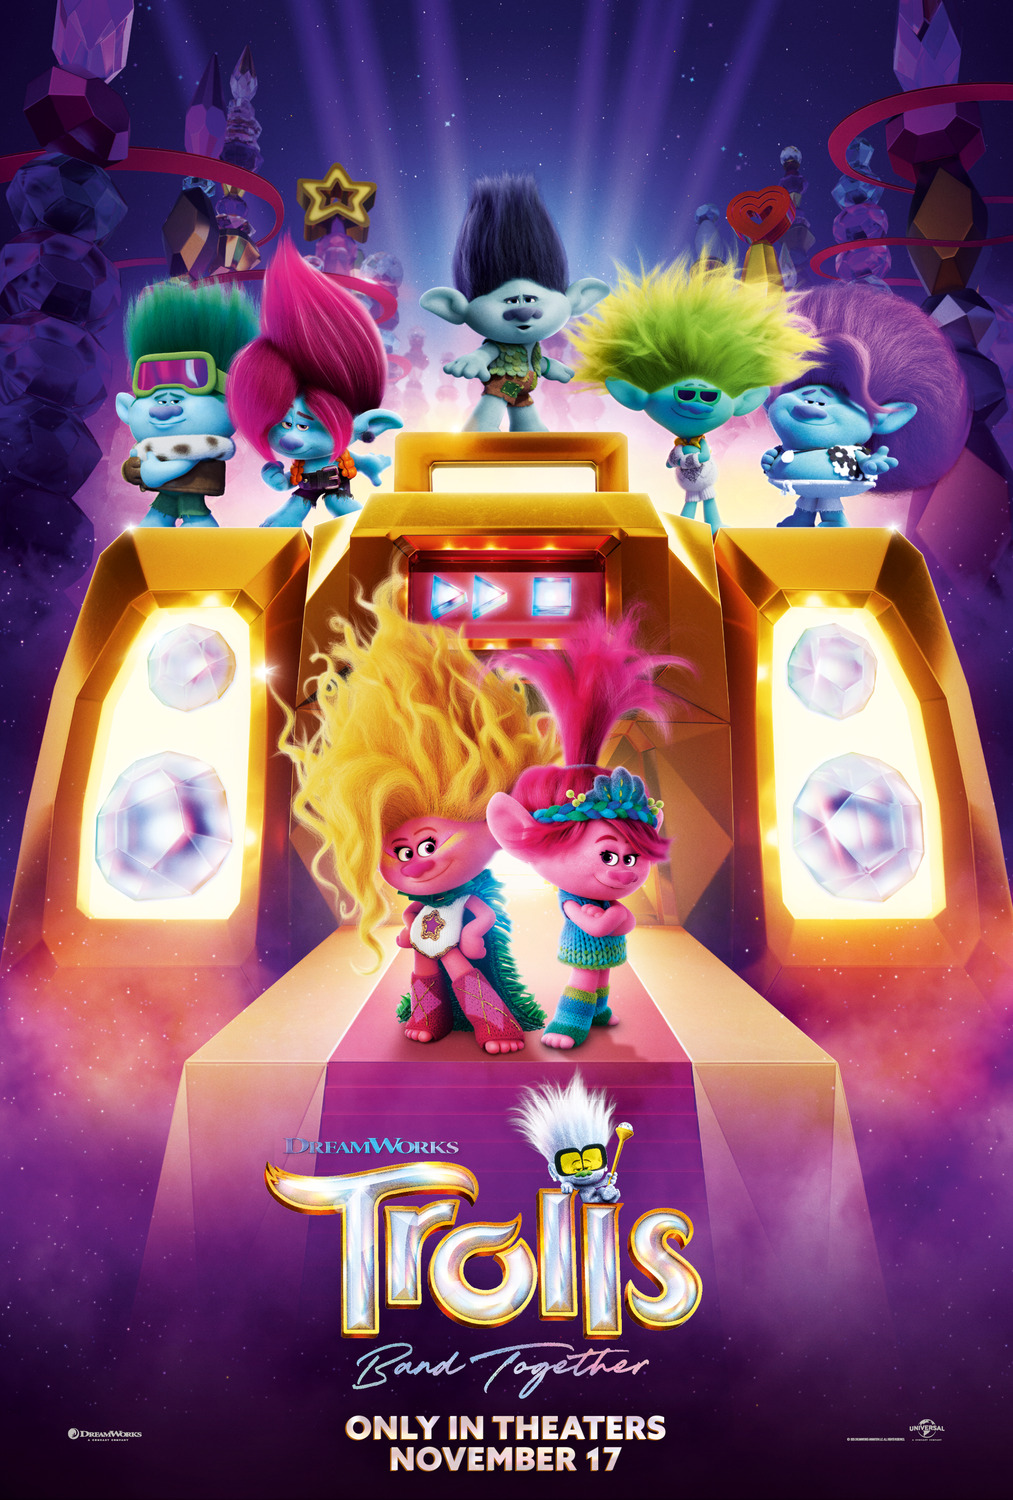 Trolls Band Together Whats After The Credits The Definitive After Credits Film